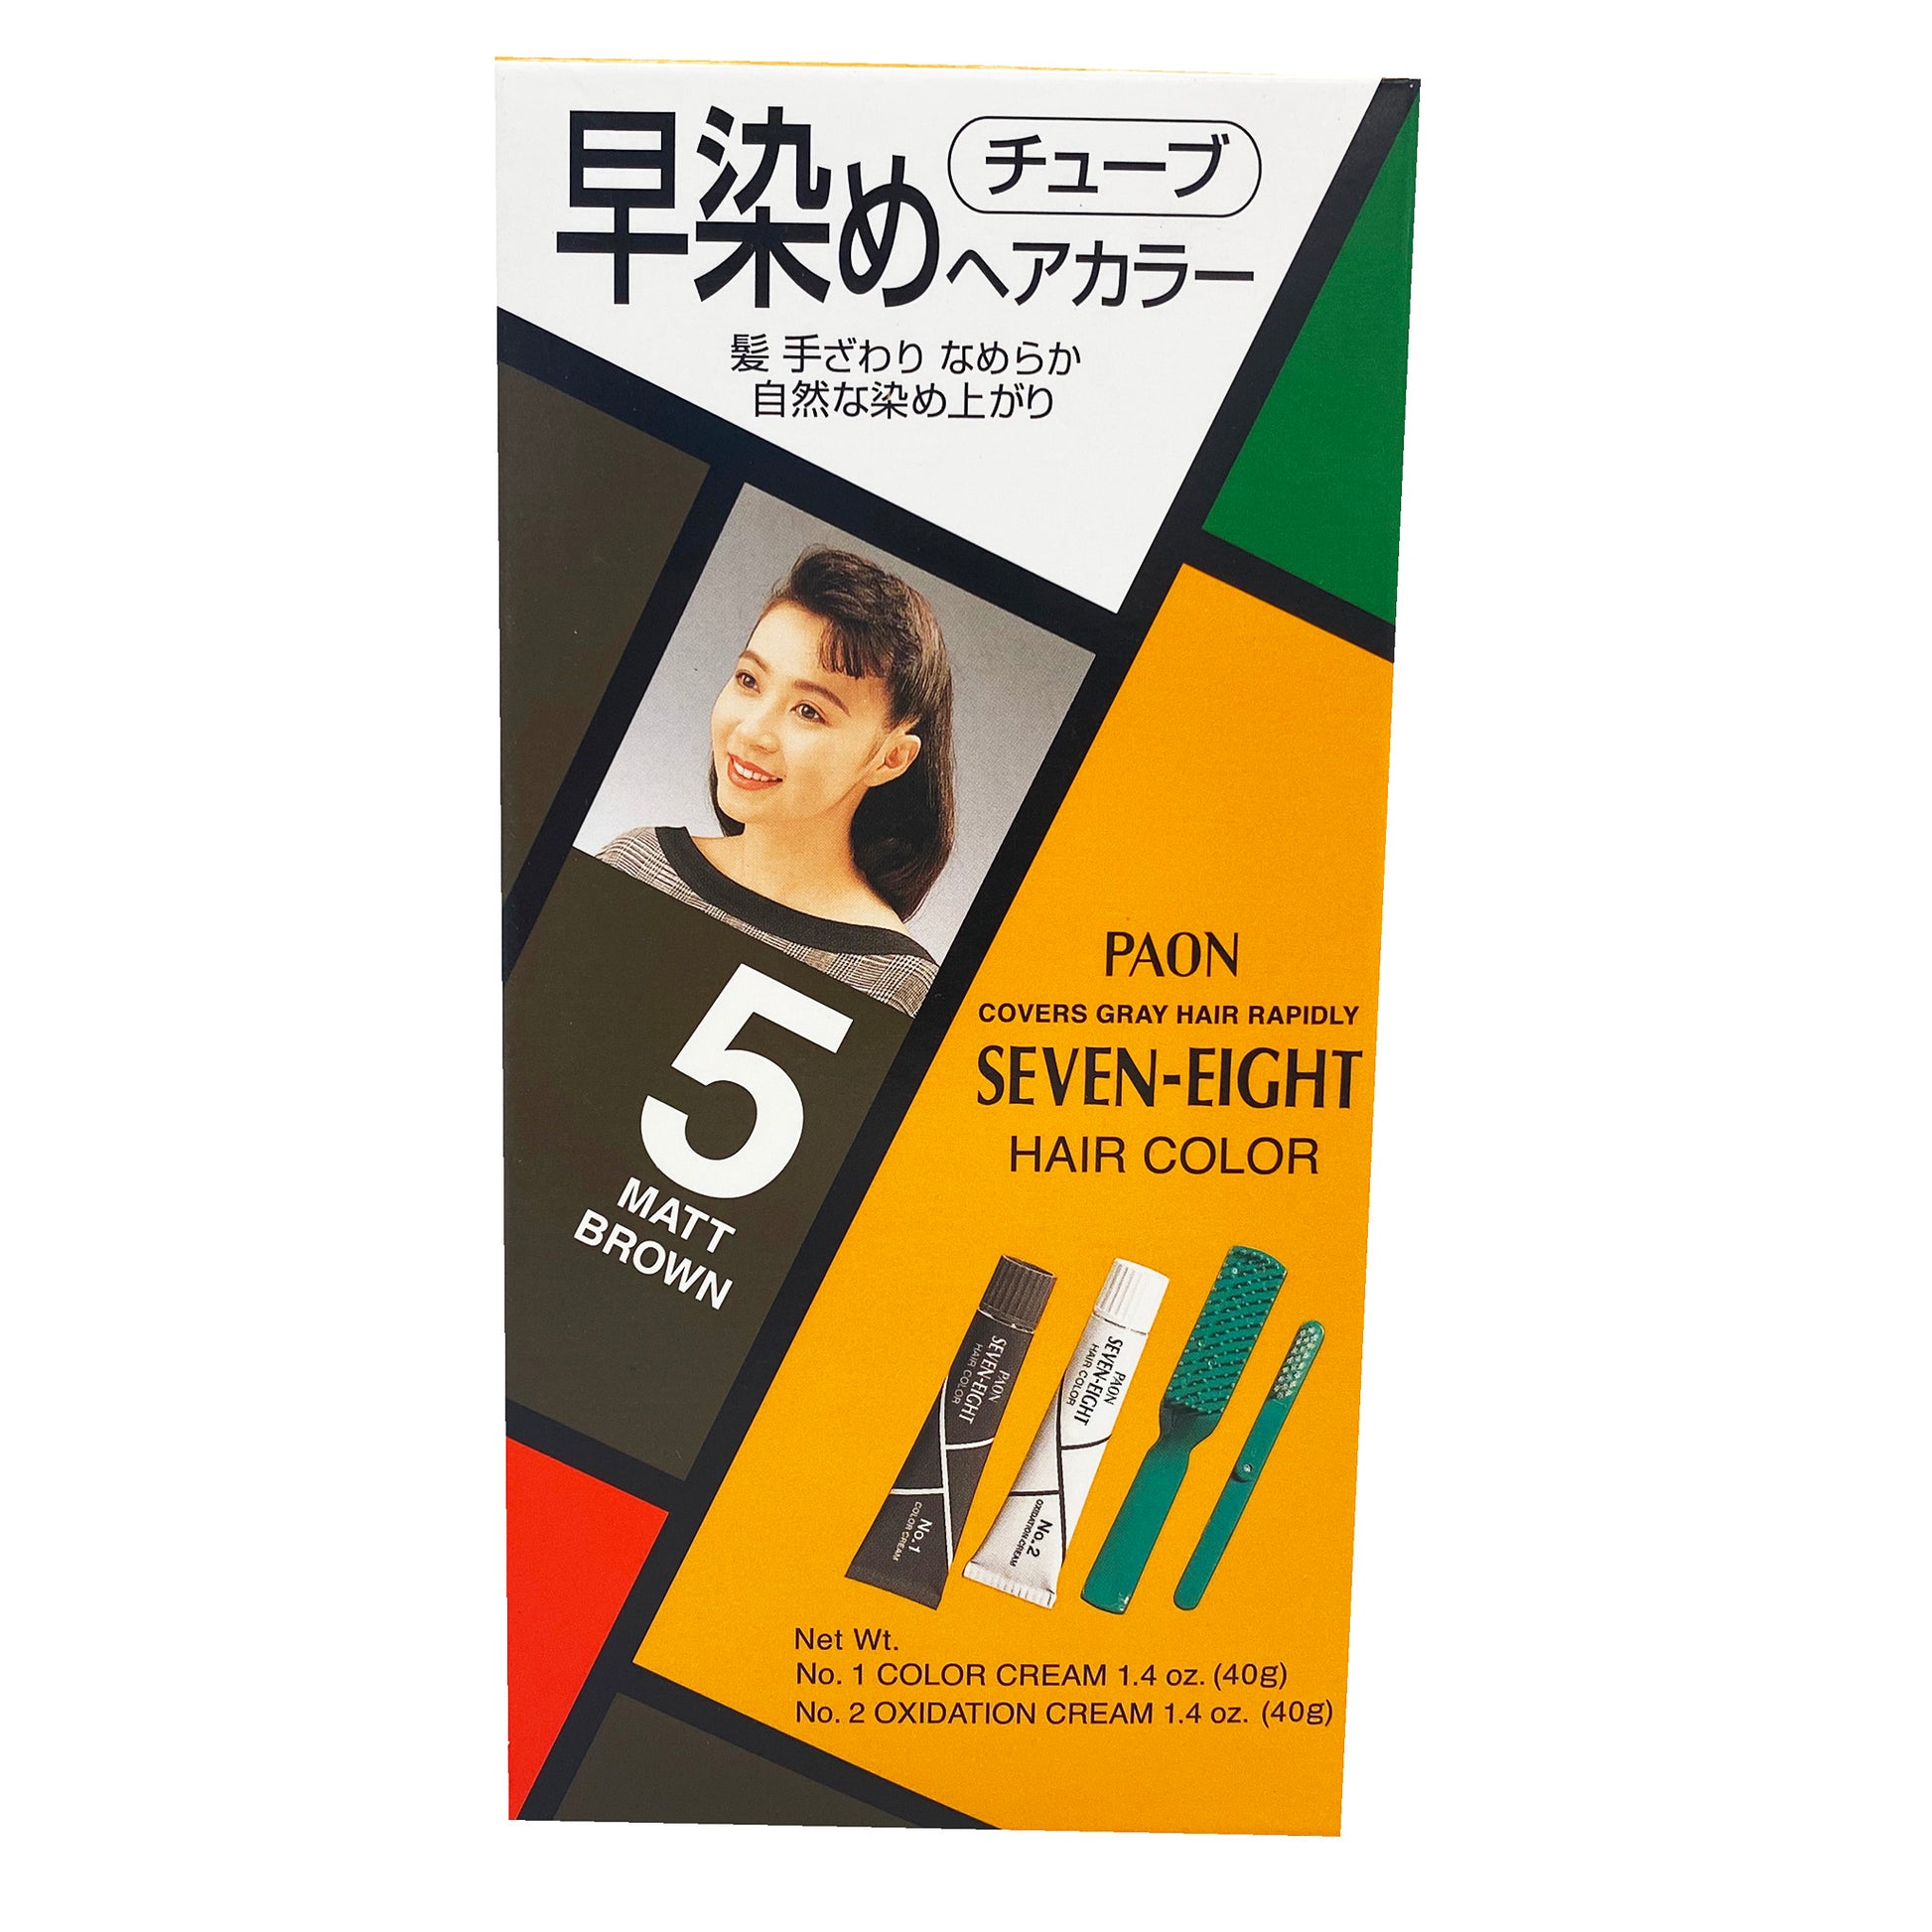 Front graphic view of Paon Seven-Eight Hair Color Cream Type - 5 Matt Brown 2.8oz